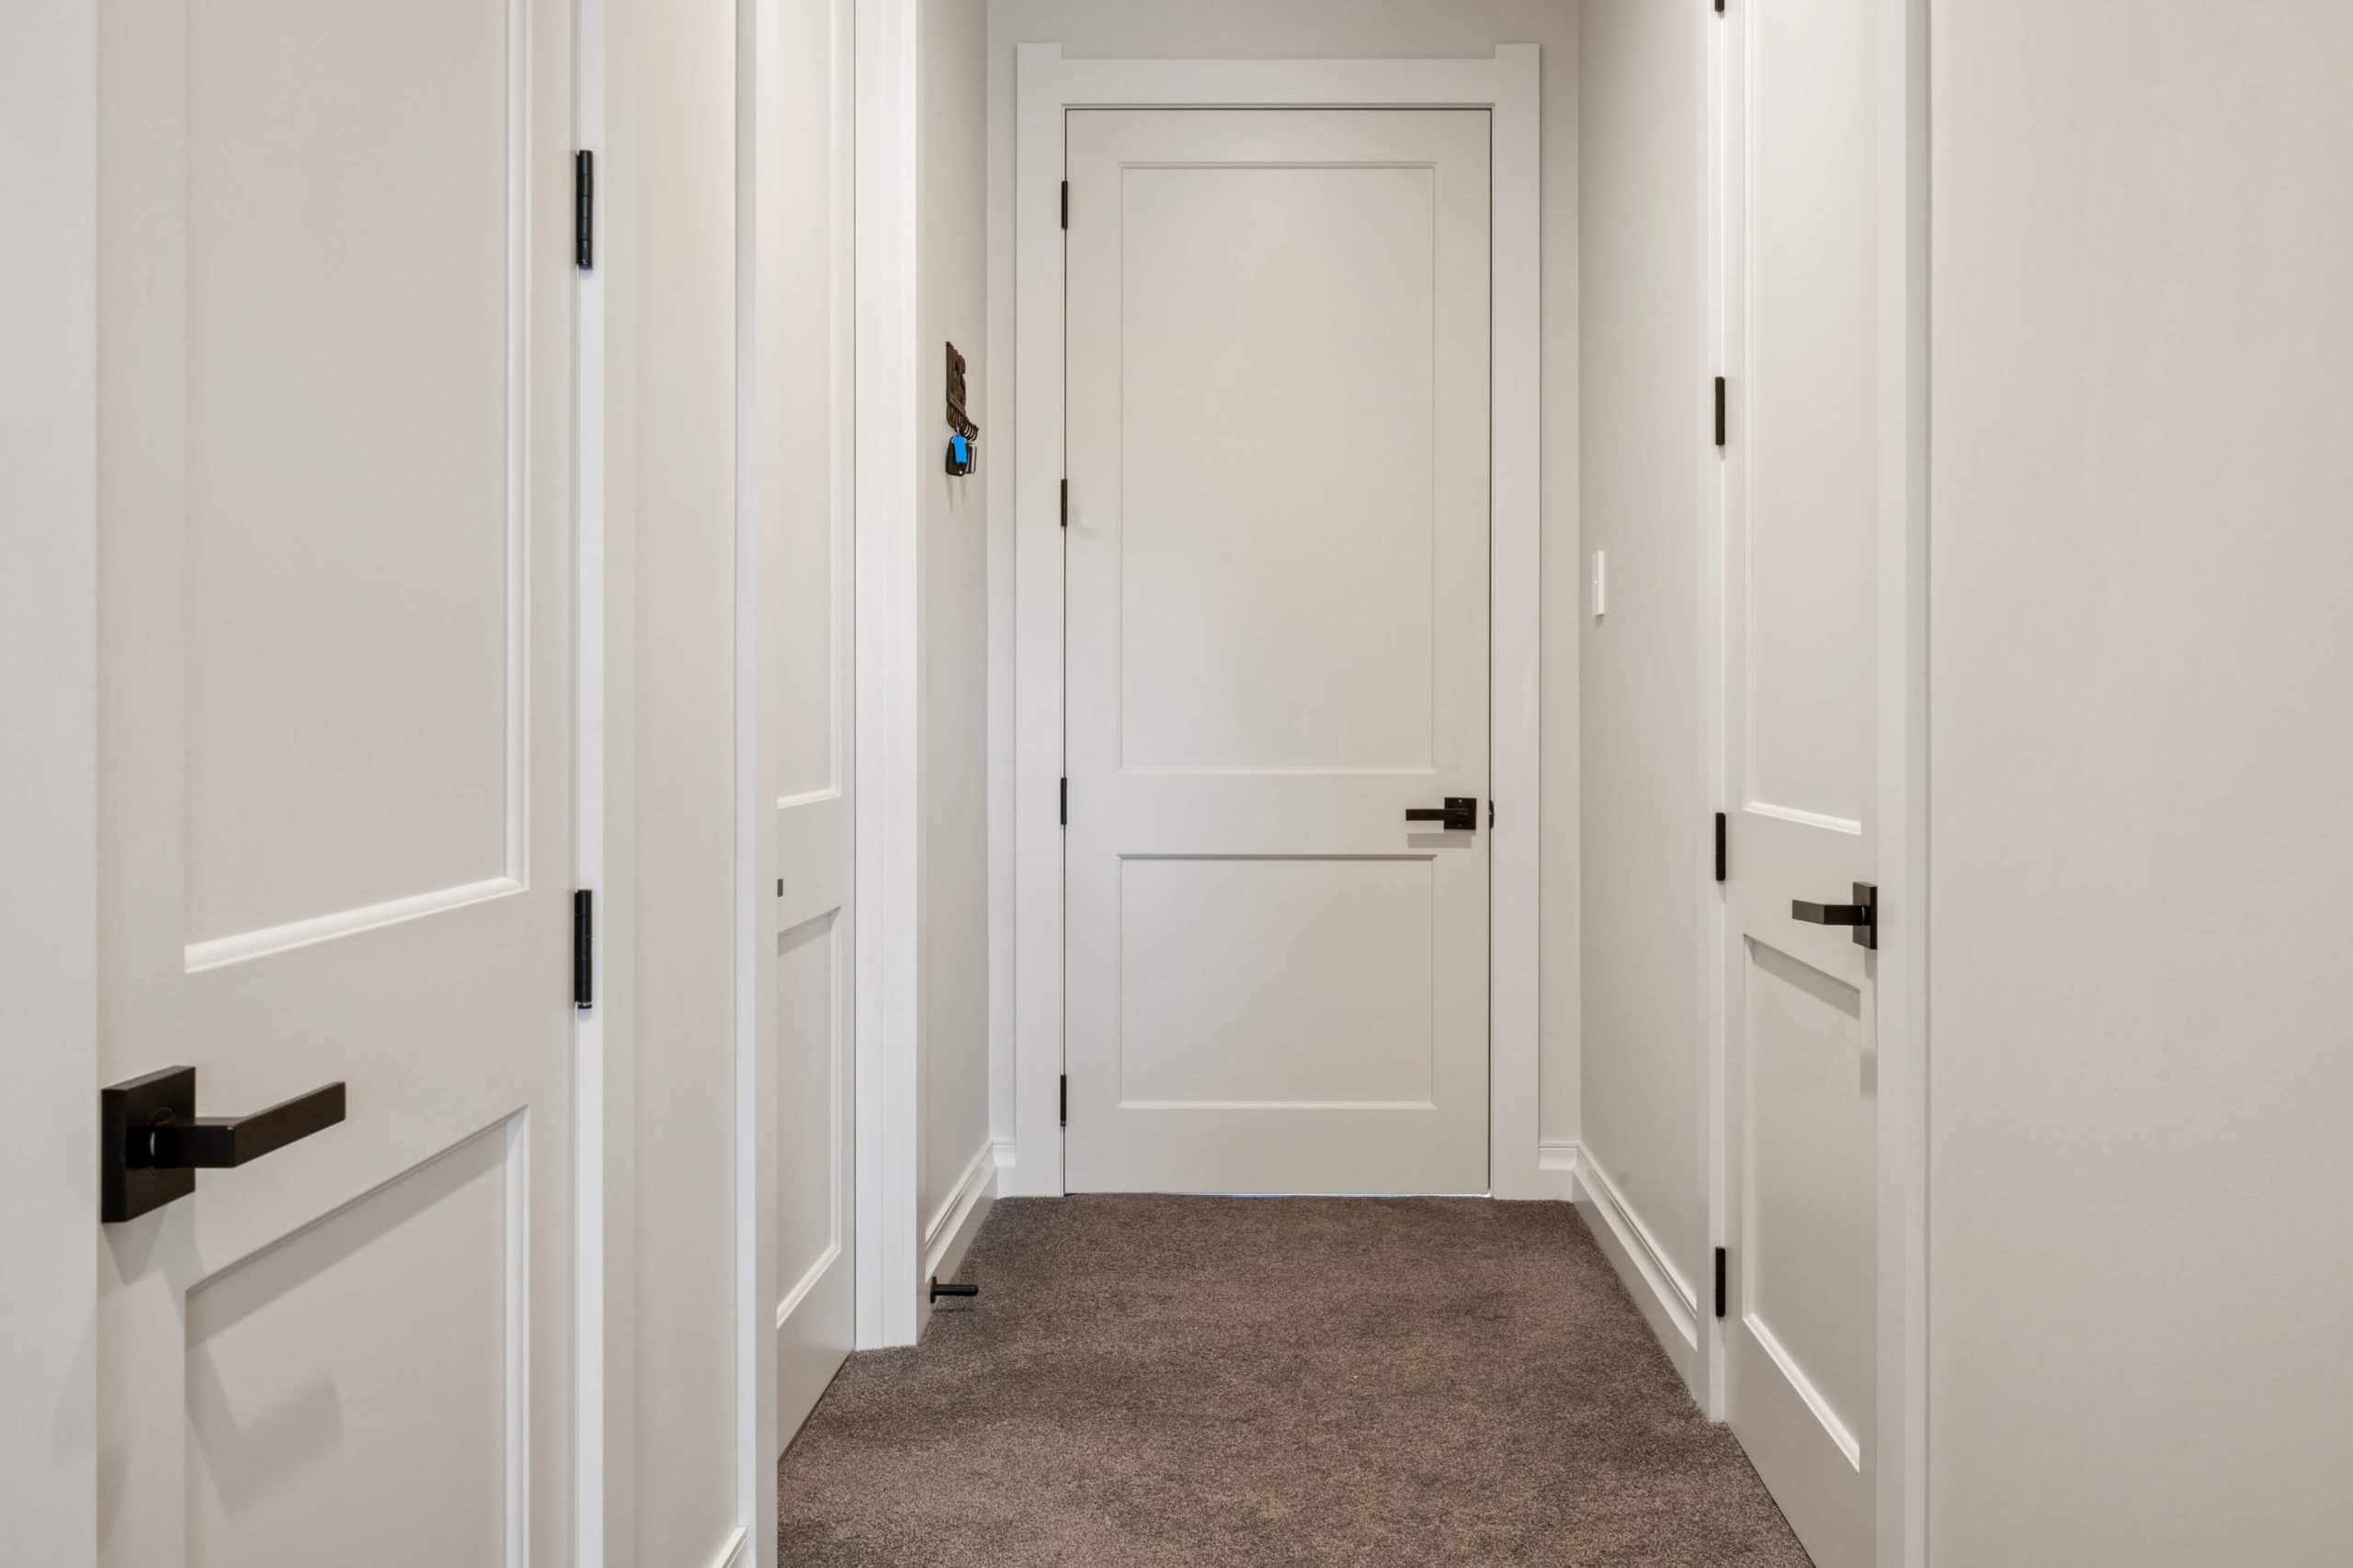 Which type of interior door should you choose: Solid Timber, Solid-core, or Hollow-core?